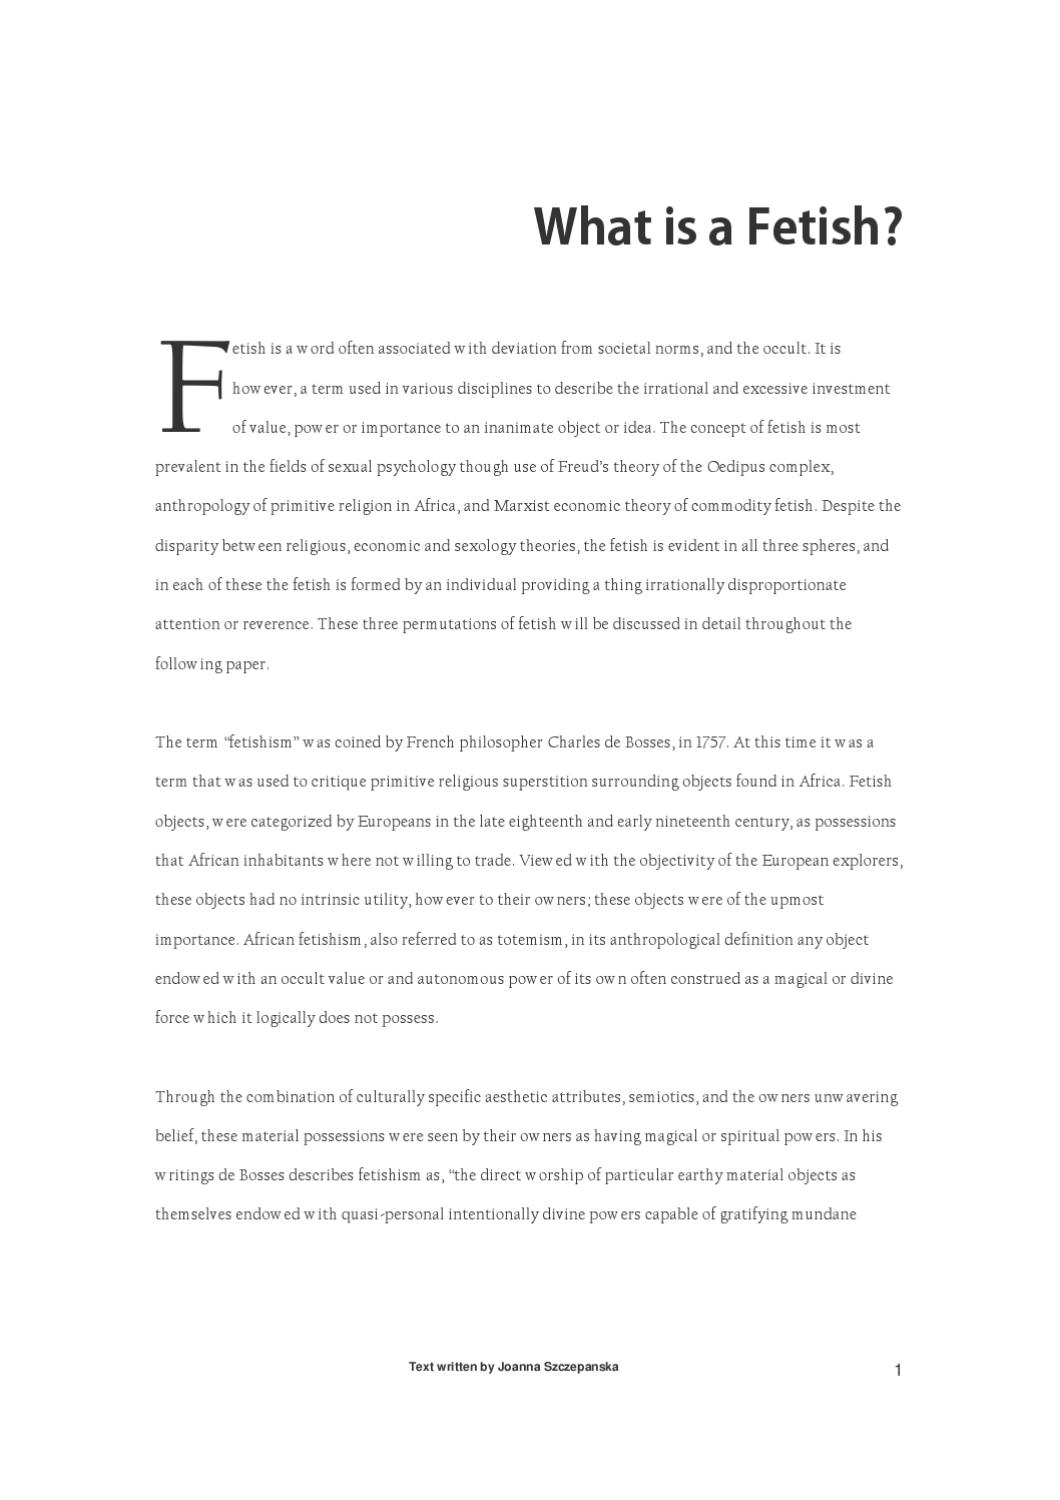 Frostbite reccomend Theory of fetish